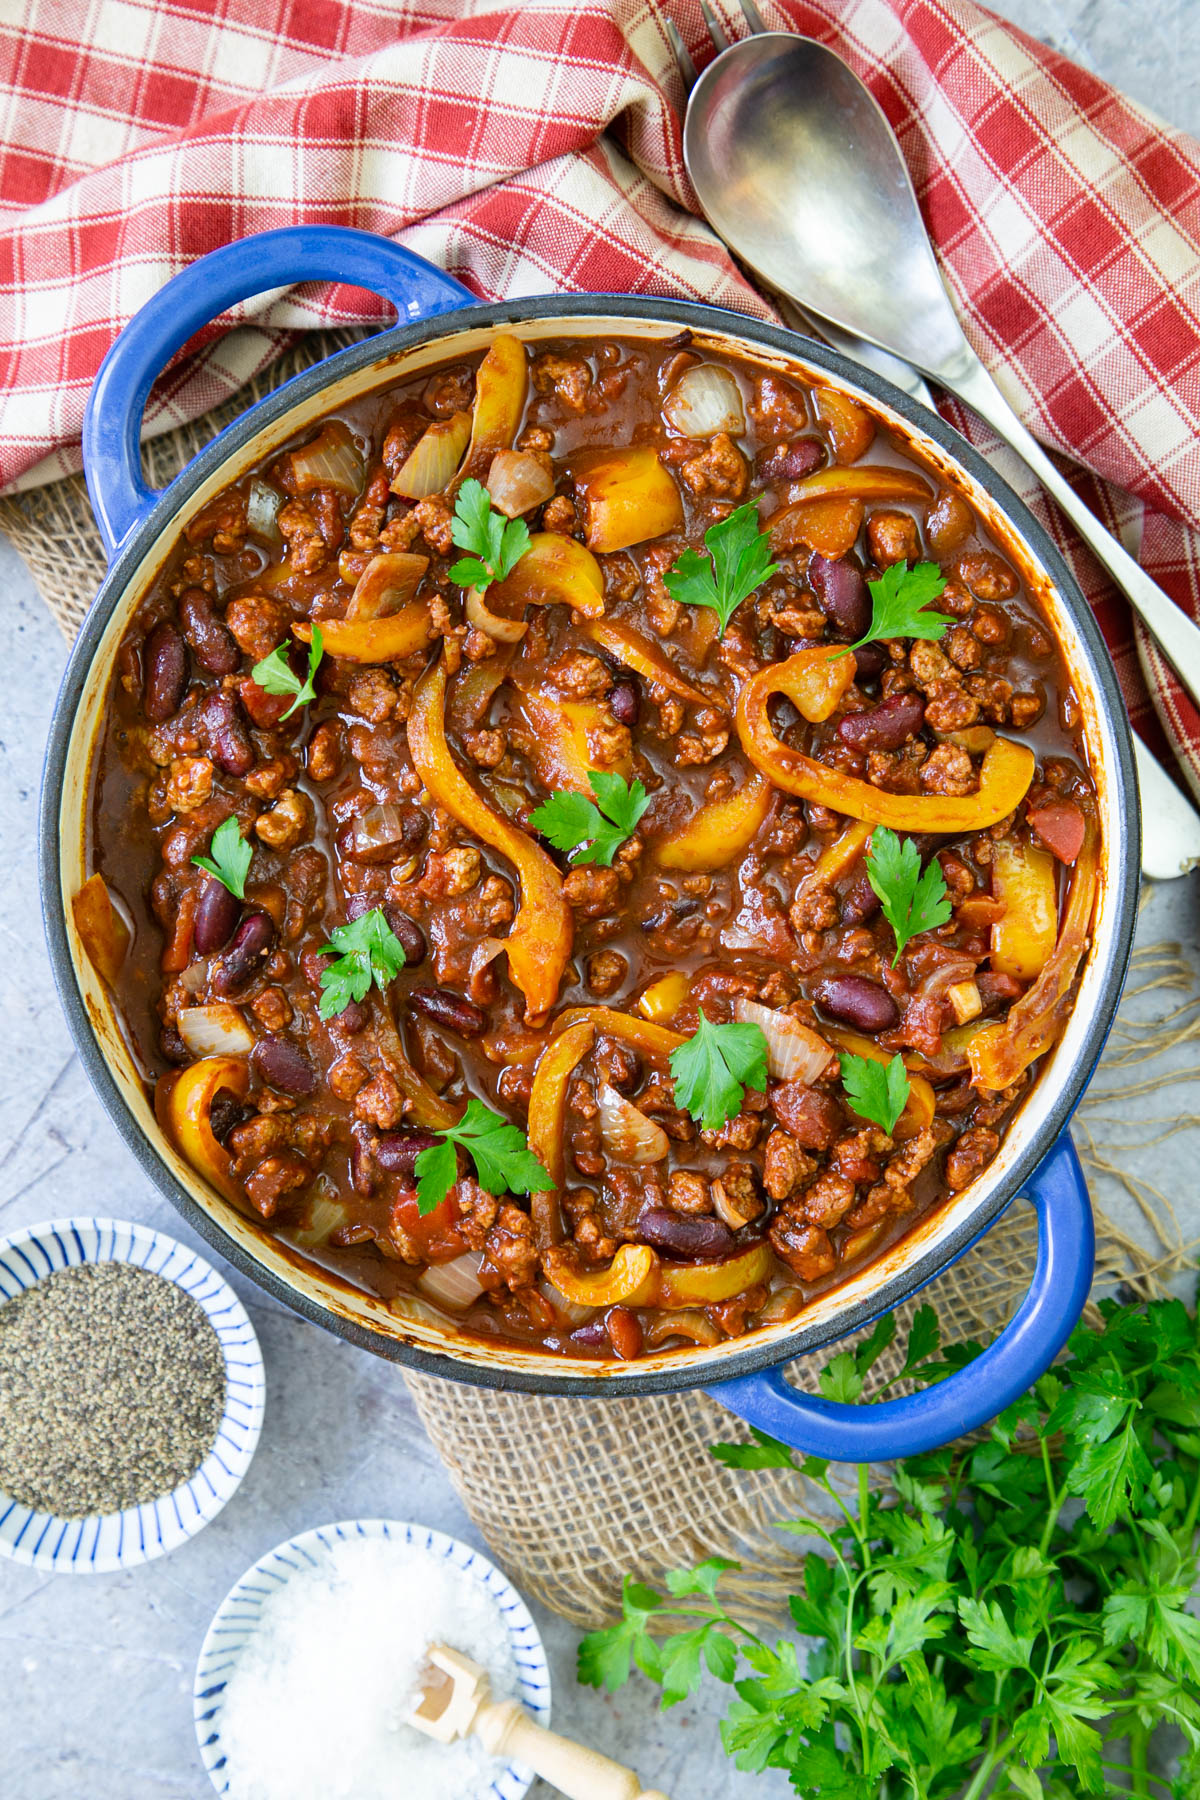 Deep, dark and delicious, this warming Quorn chilli, ready to serve.